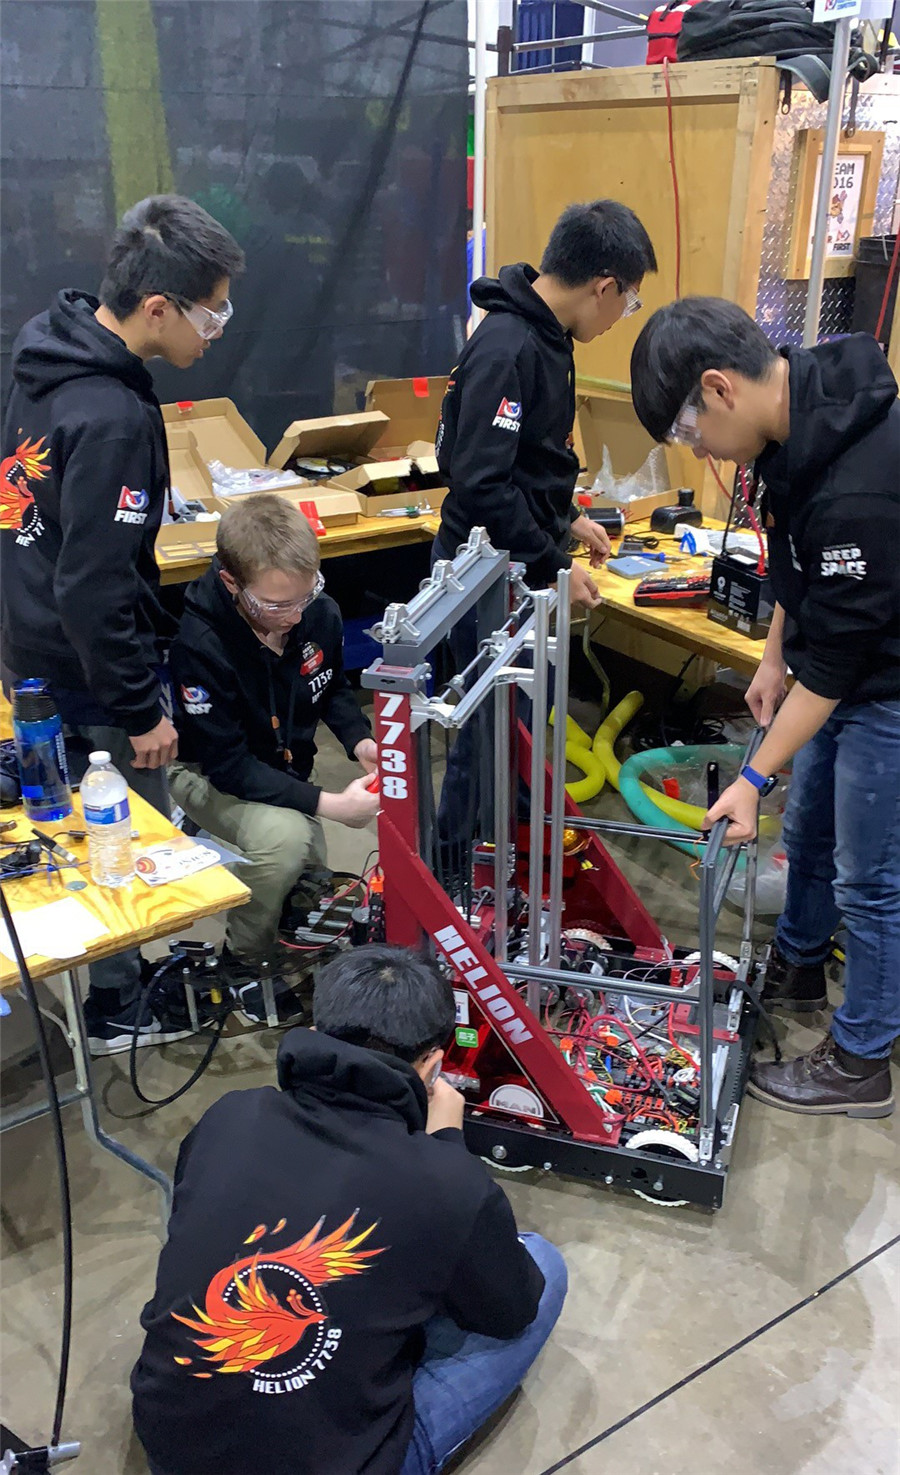 Dulwich College Beijing Team Helion working at FIRST Robotics Competition Midwest Regionals Chicago